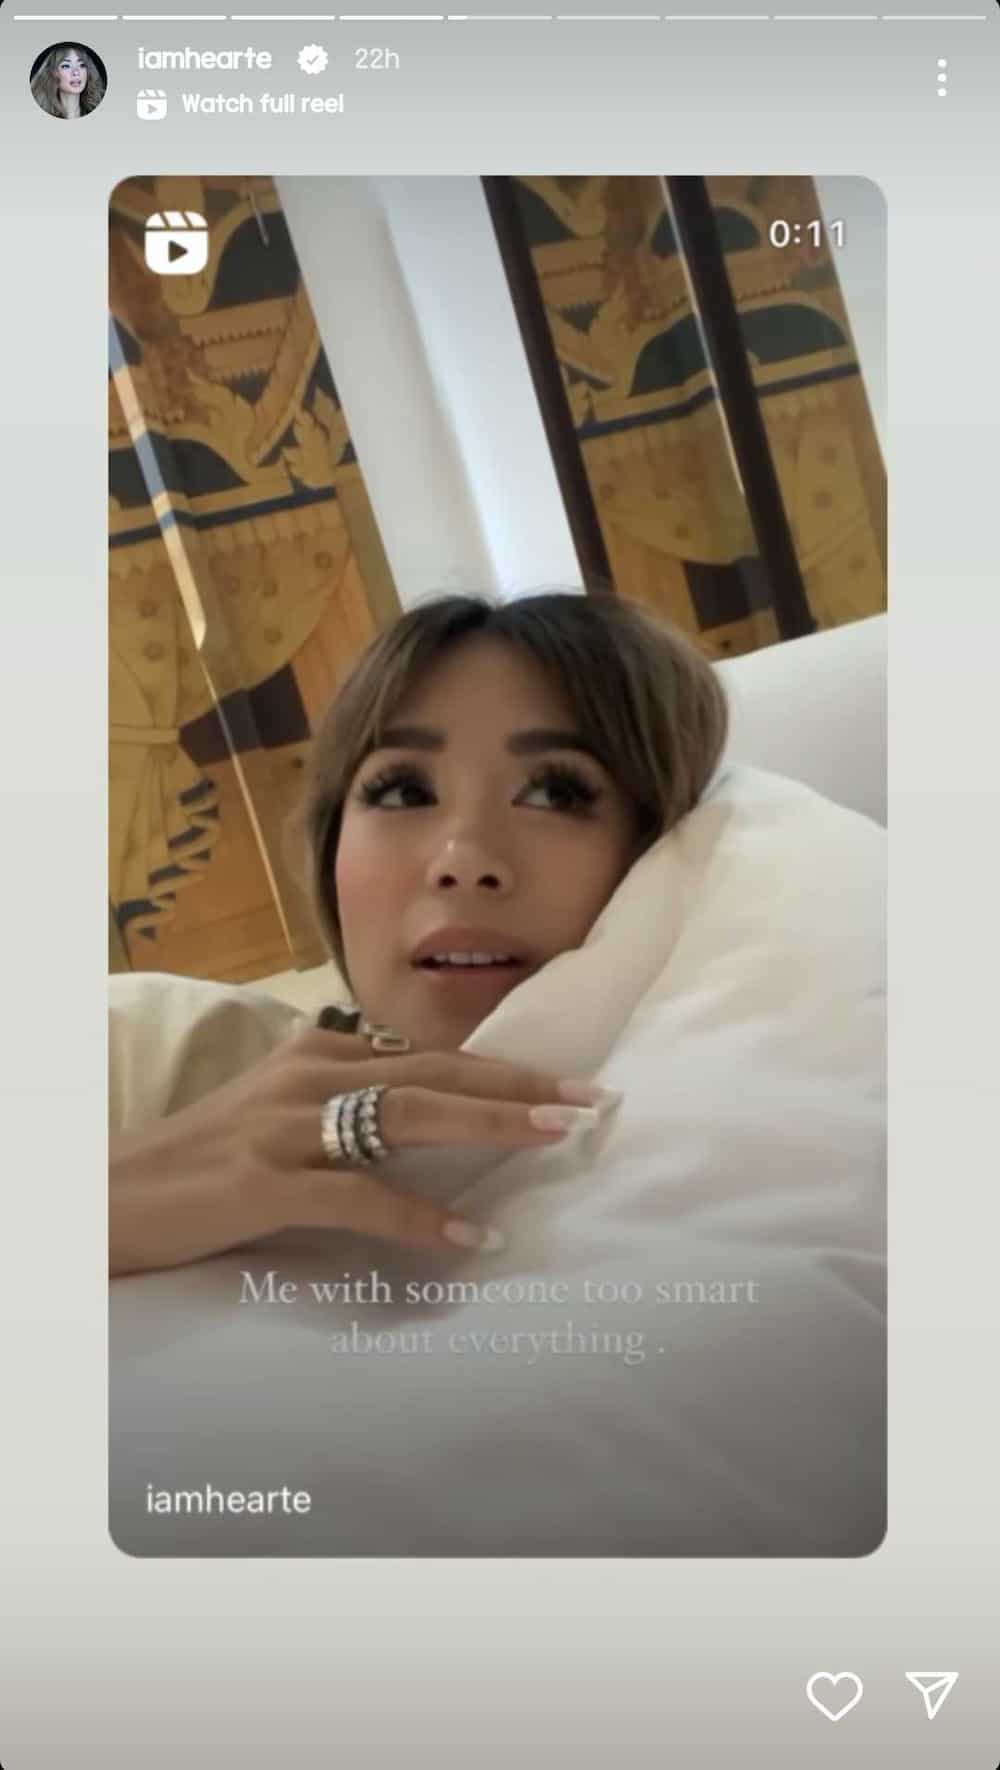 Heart Evangelista reposts old video about "someone too smart" online